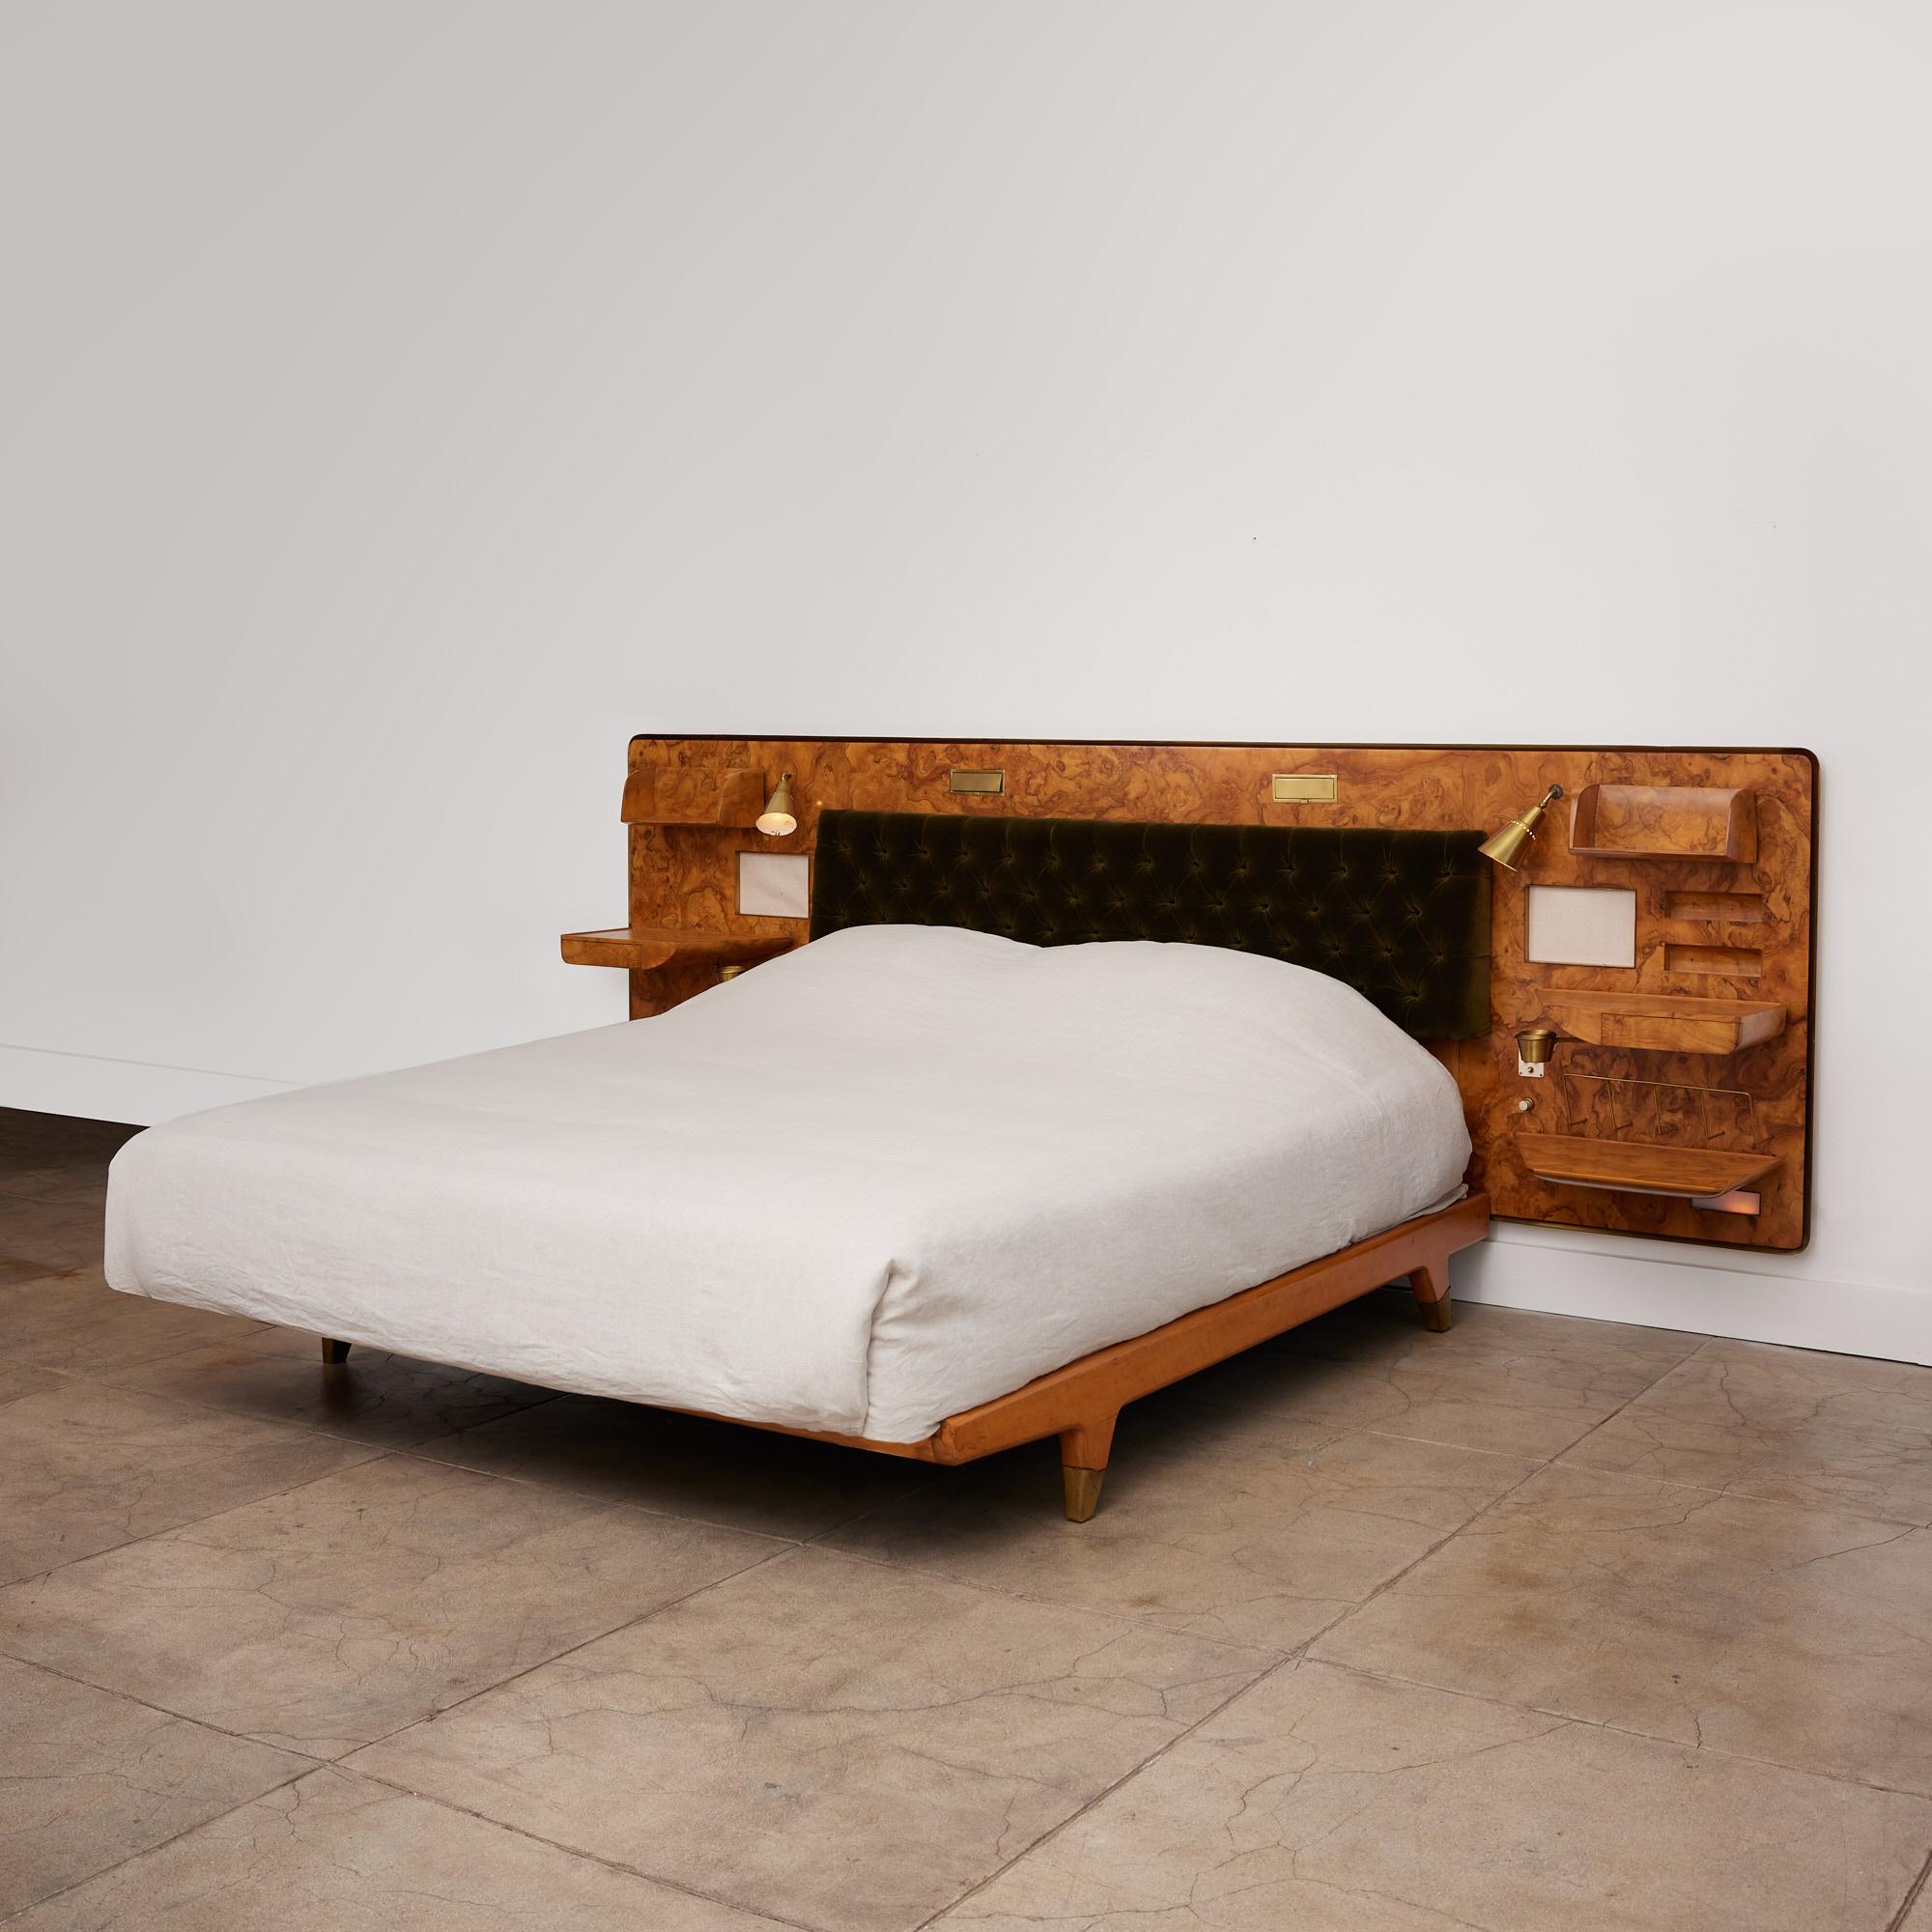 Bed by Gio Ponti, executed by Giordano Chiesa, c.1950s, Italy. This one of a kind piece was commissioned by the Ceccato family, owners of the popular confectionary empire, Dulciora, for their residence in Milan. The bed is comprised of Ferrara root